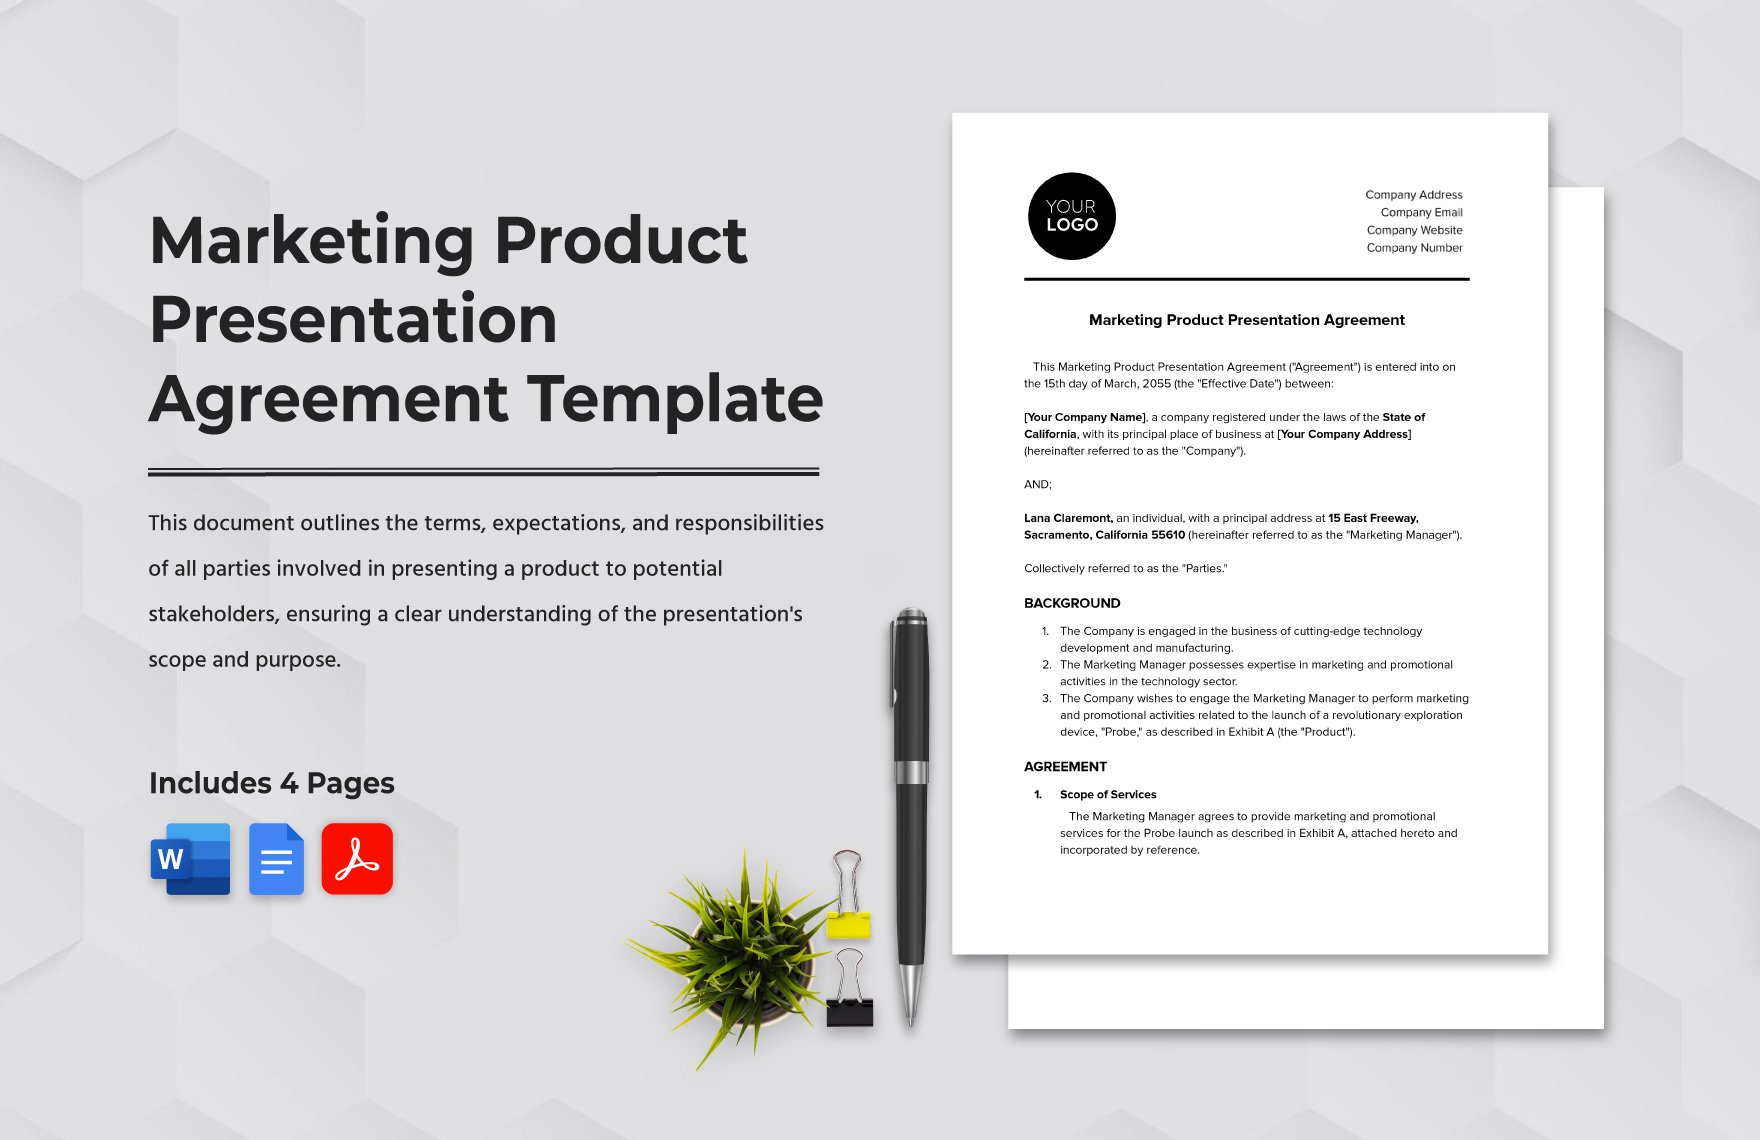 Marketing Product Presentation Agreement Template in Word, Google Docs, PDF